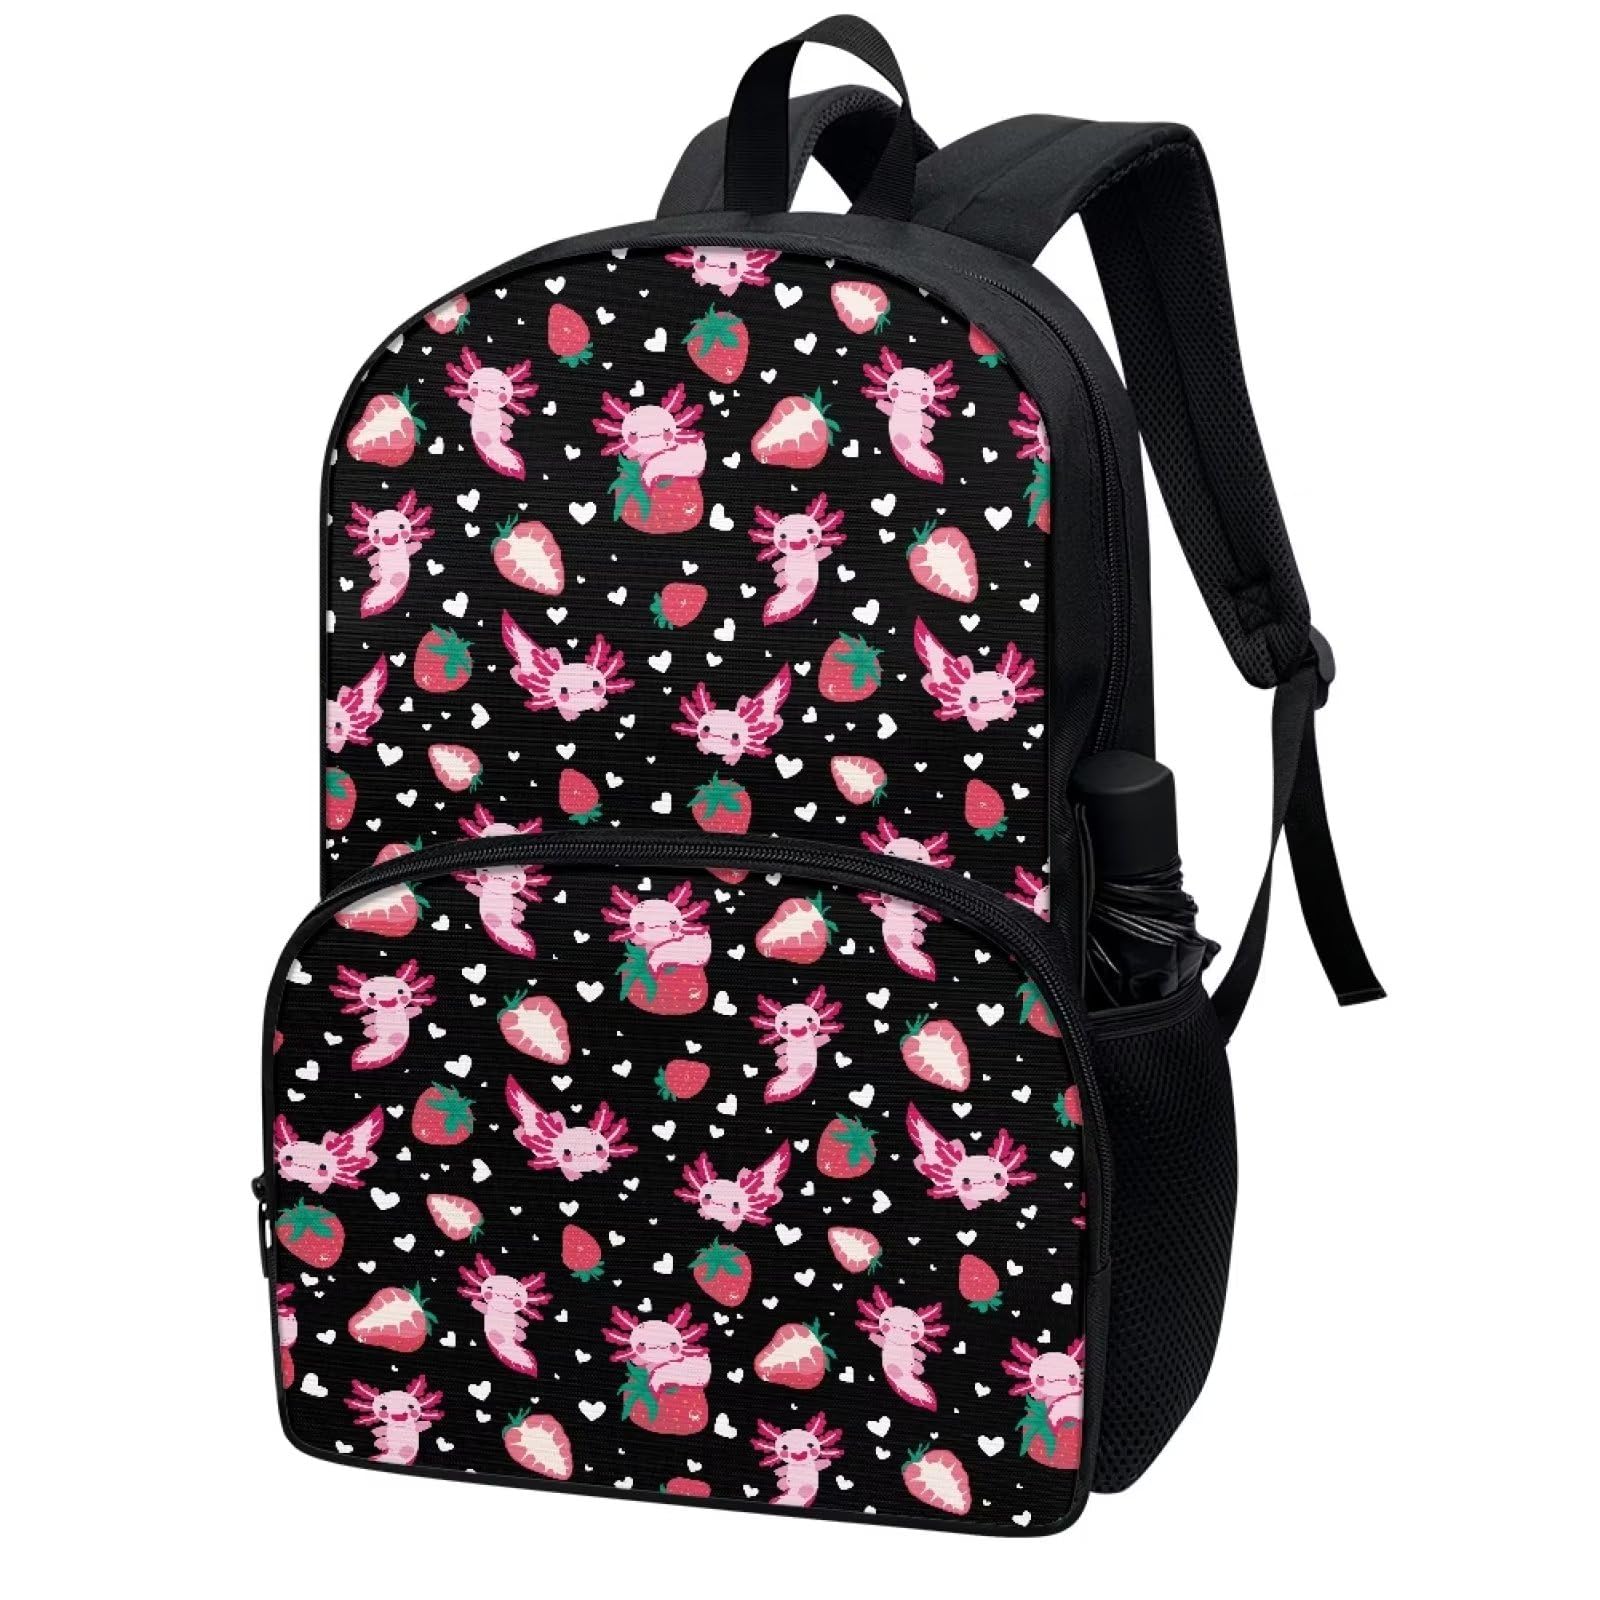 Parprinty Cartoon Strawberry Axolotl Backpack for Girls Durable Sturdy Lightweight 17" Cute School Backpack Teen Girls Kids Black Bookbag Double Zipper Aesthetic Casual Daypack with Front Pocket